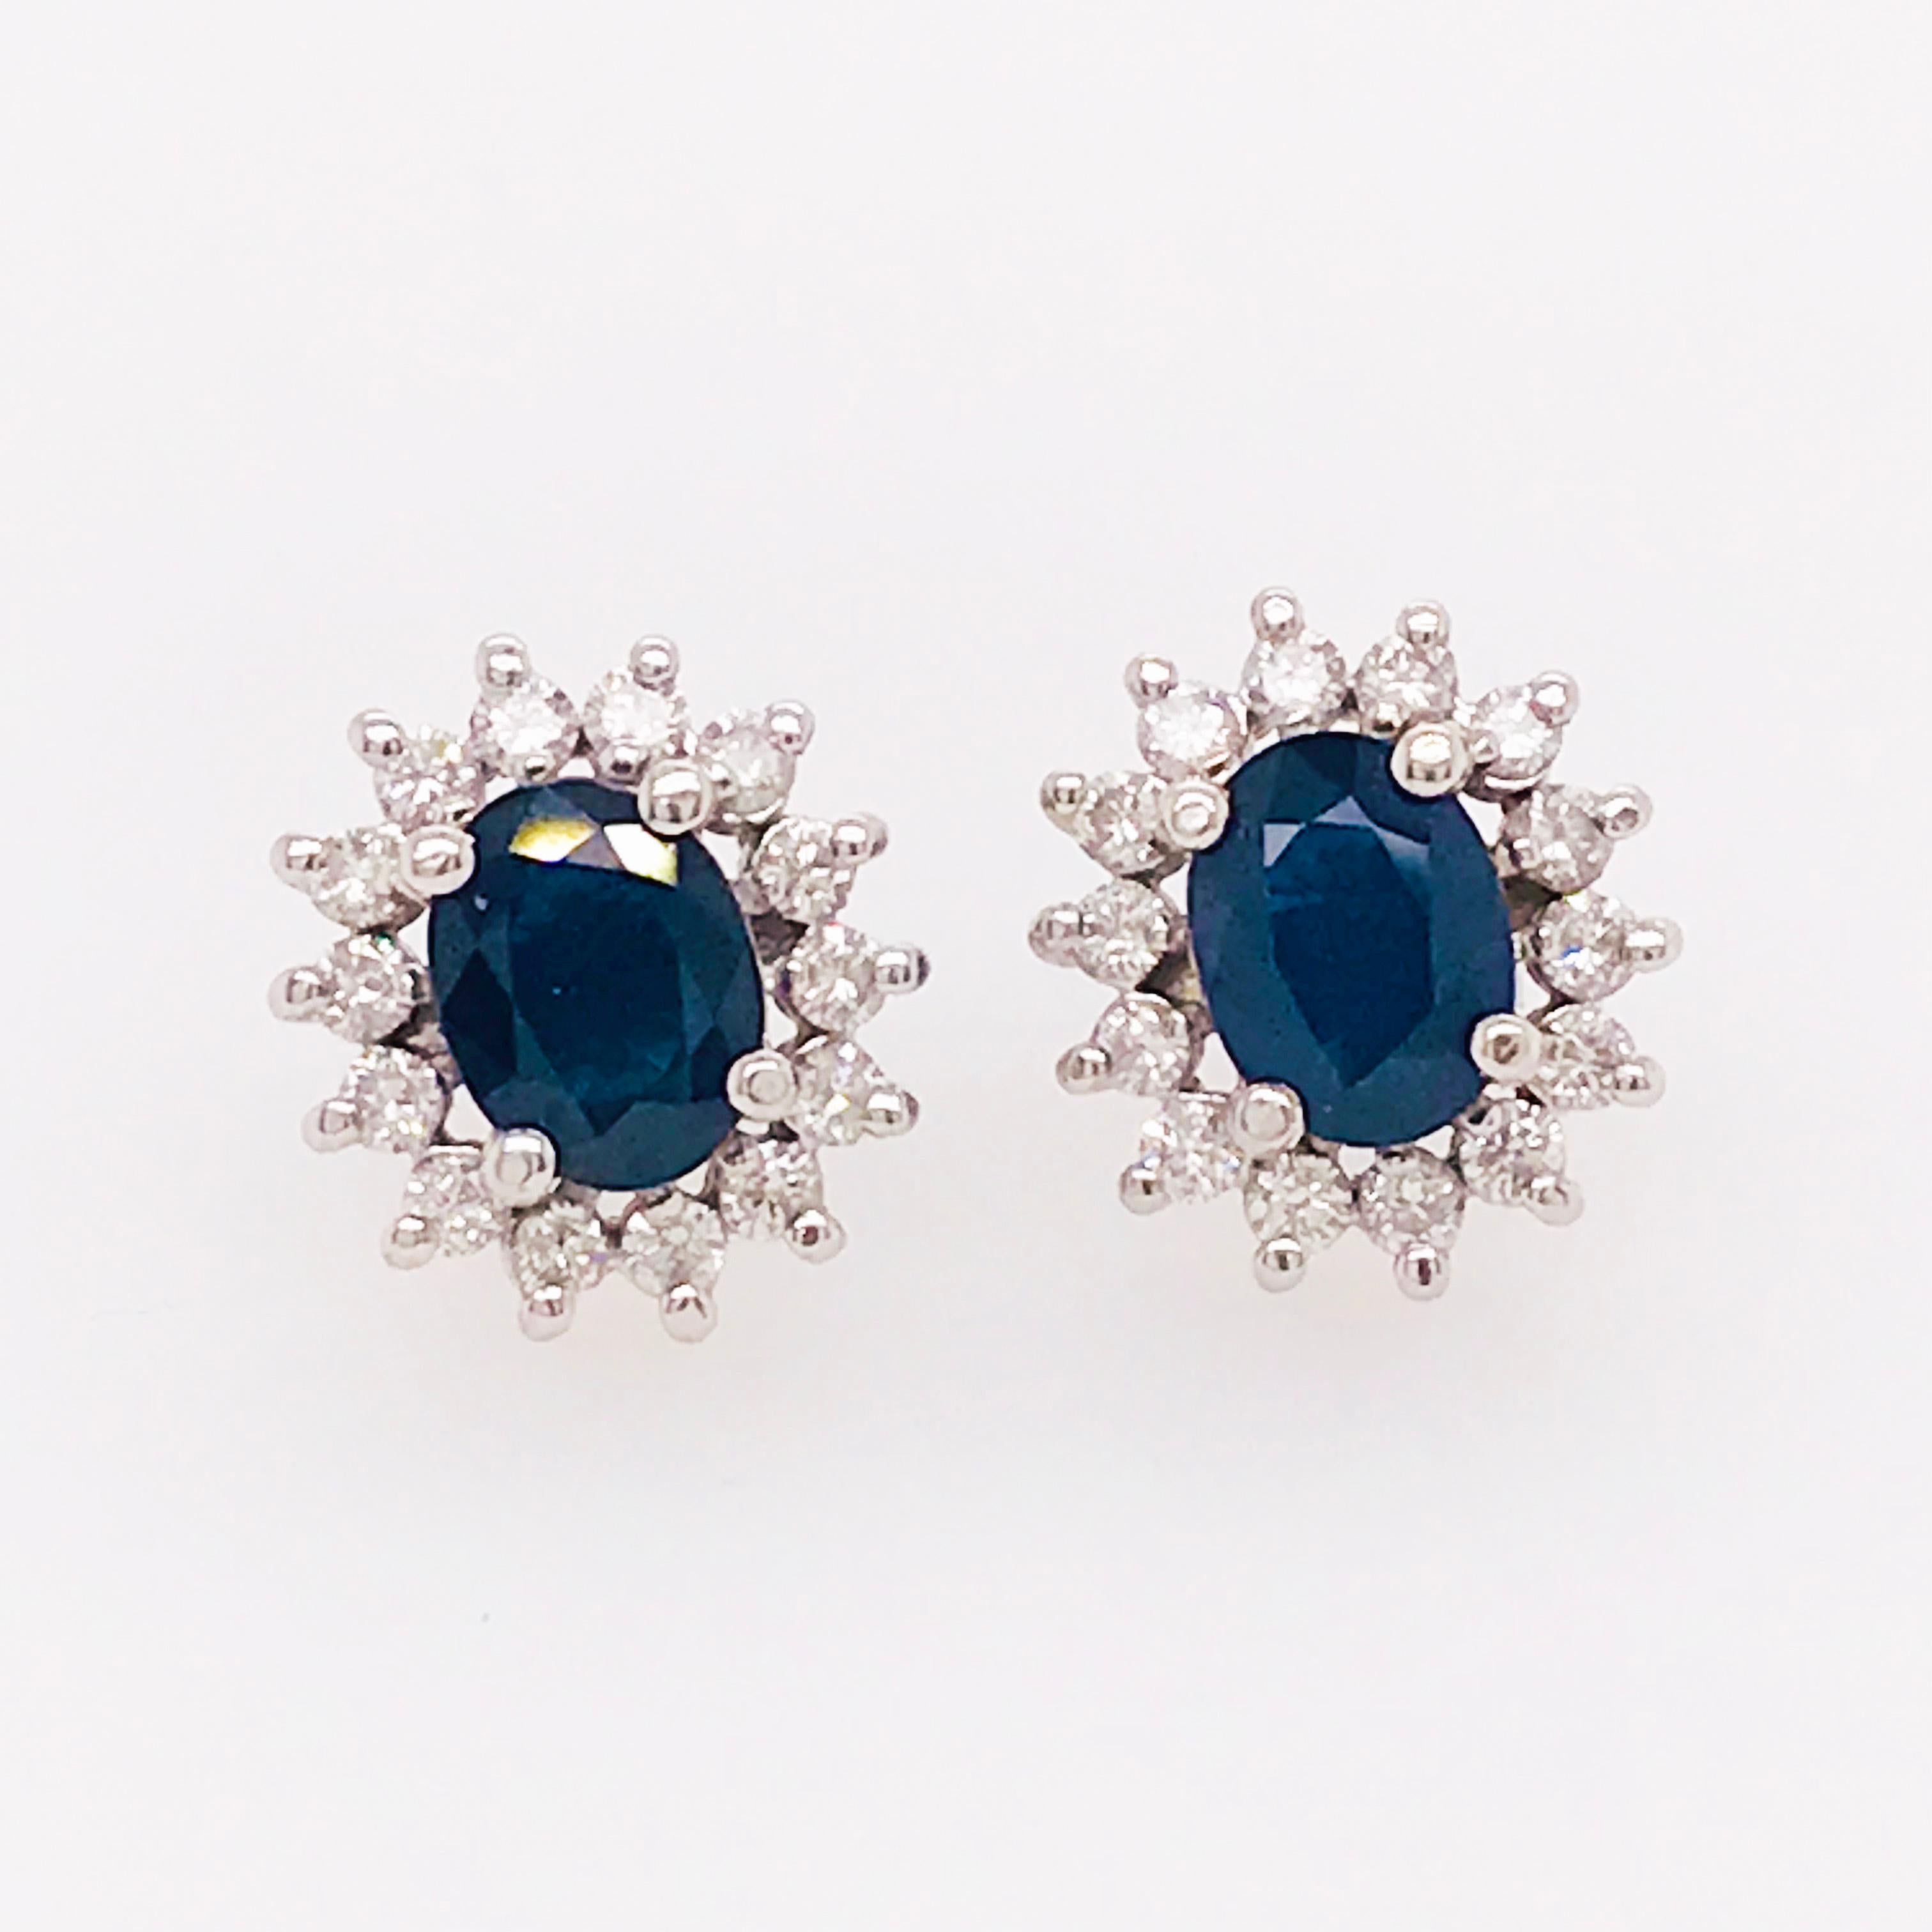 These sapphire and diamond estate earring studs are classic and timeless! With a genuine blue sapphire, cut in an oval shape, set in the center. The oval shape allows the blue color to showcase its brightest and most vibrant blue. 
Framing the